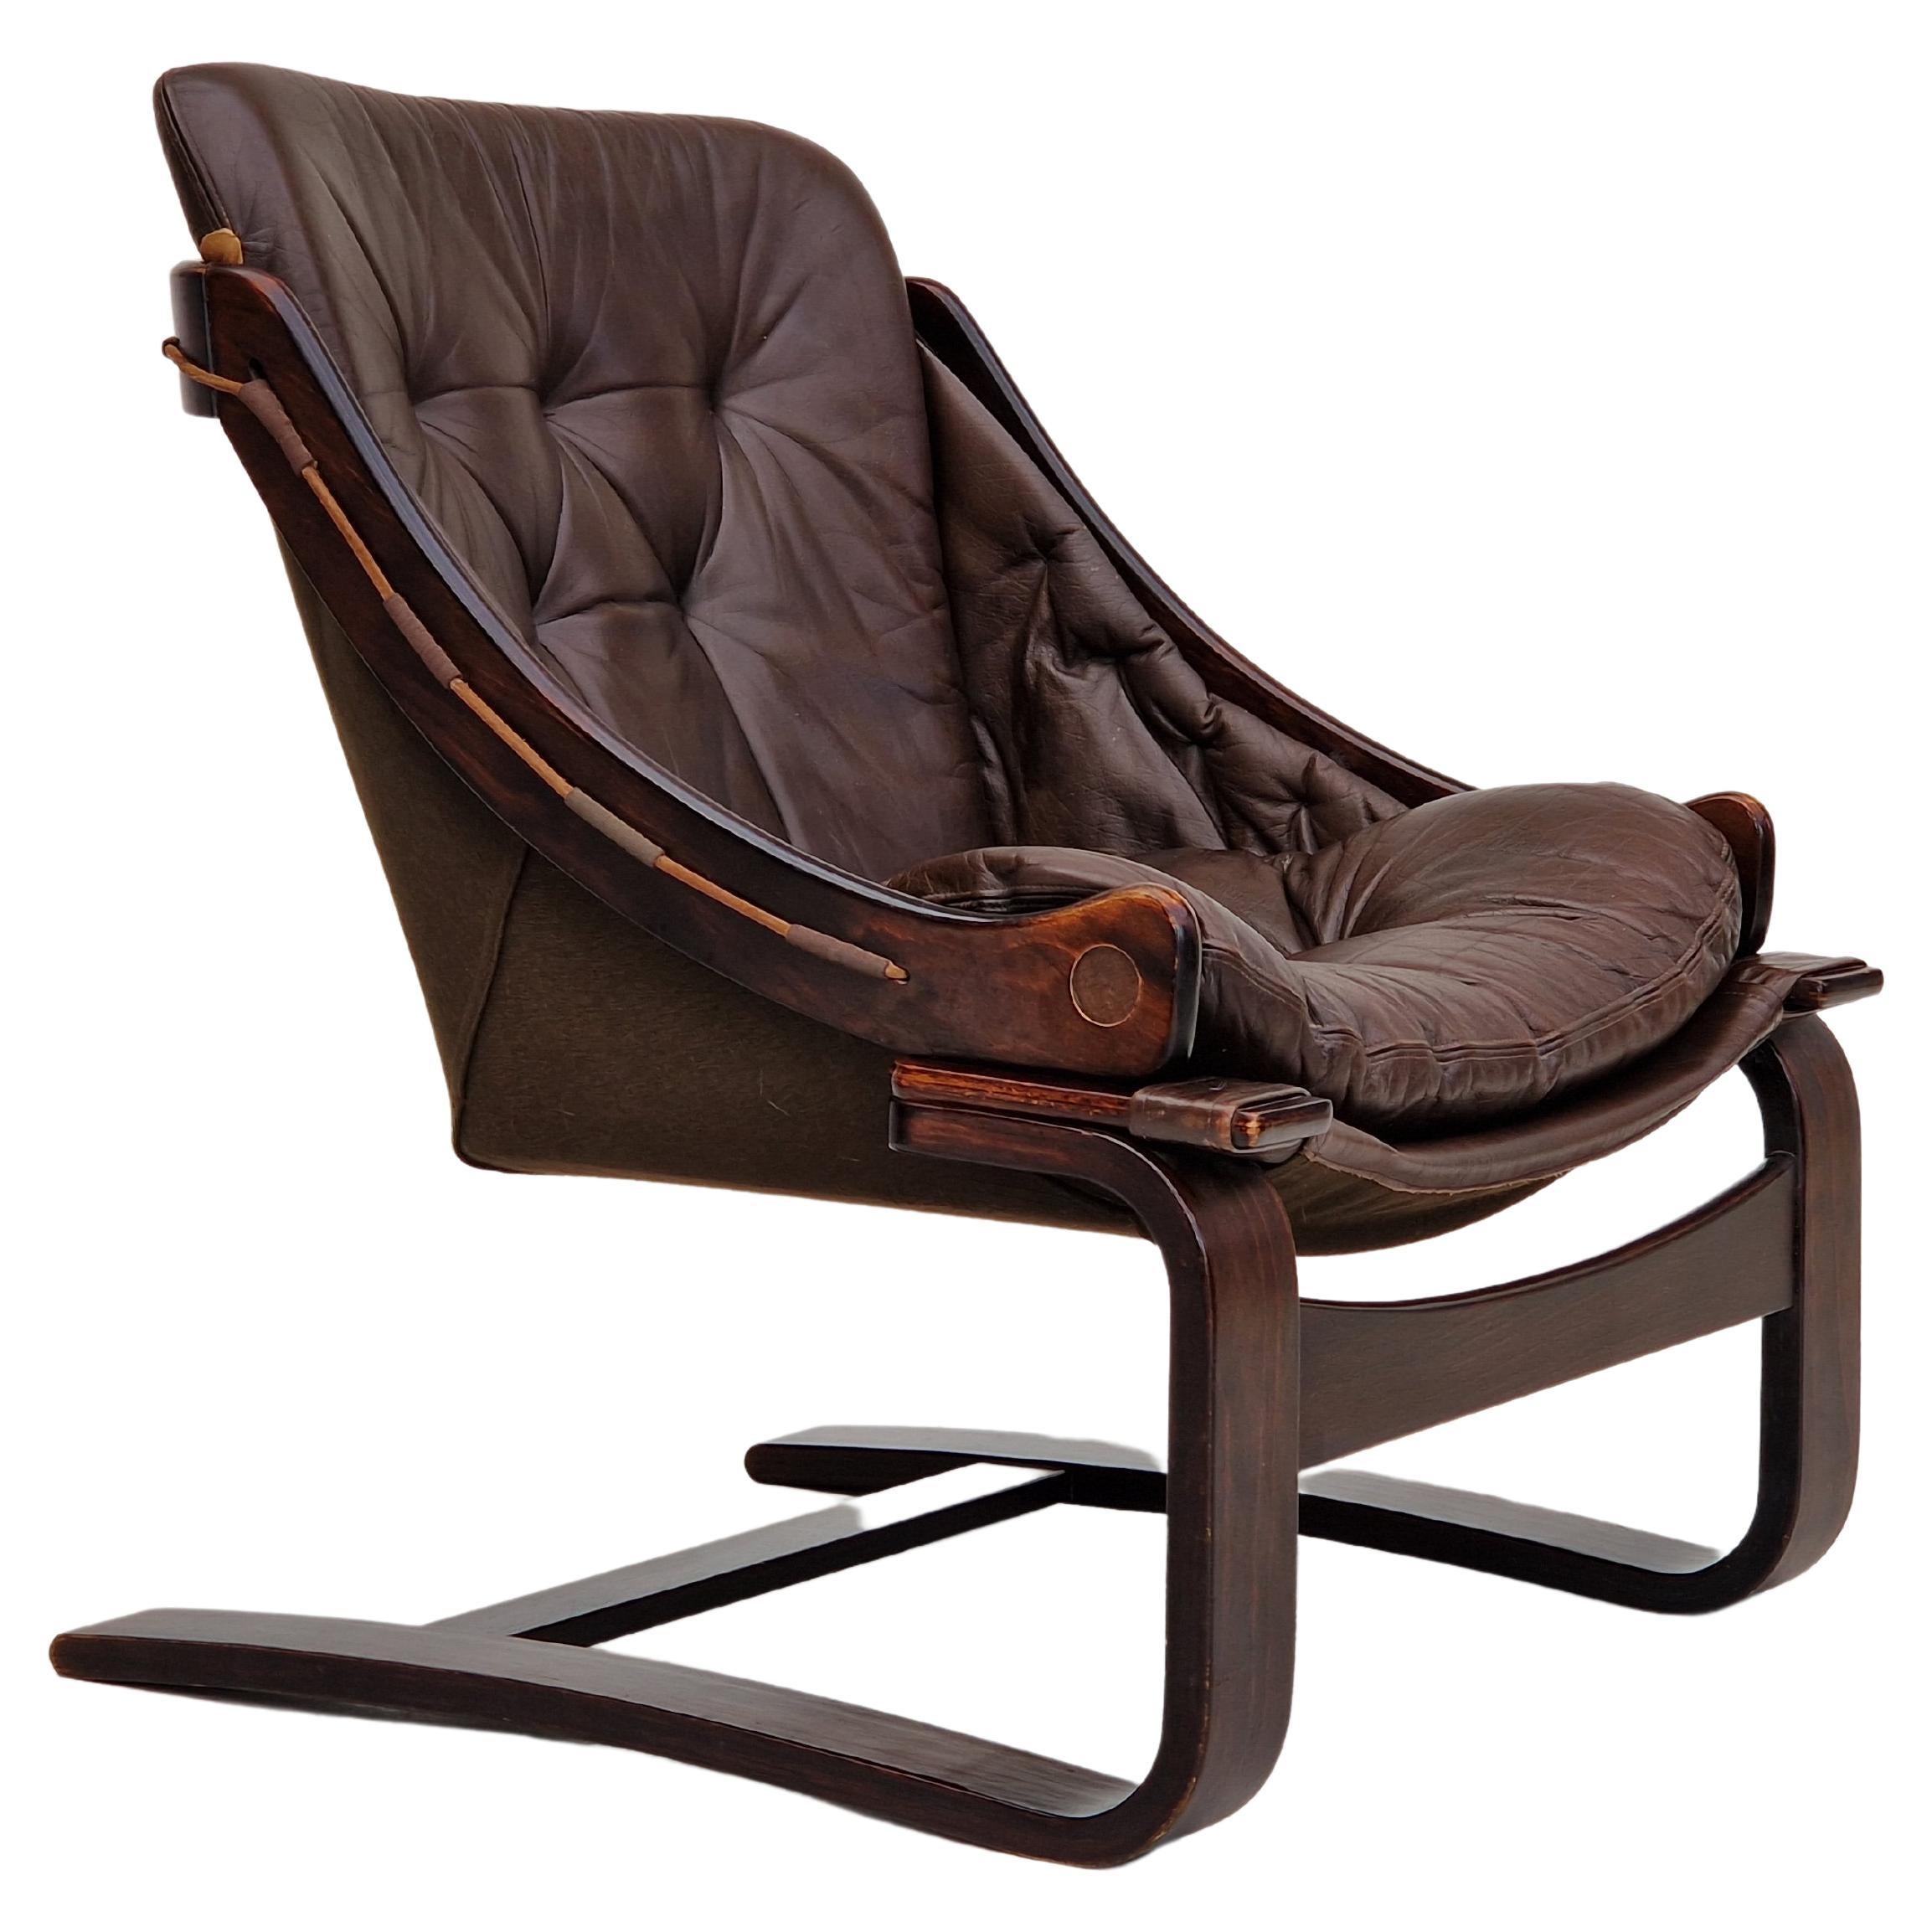 1970s, Brown Leather Lounge Chair by Ake Fribytter for Nelo Sweden For Sale